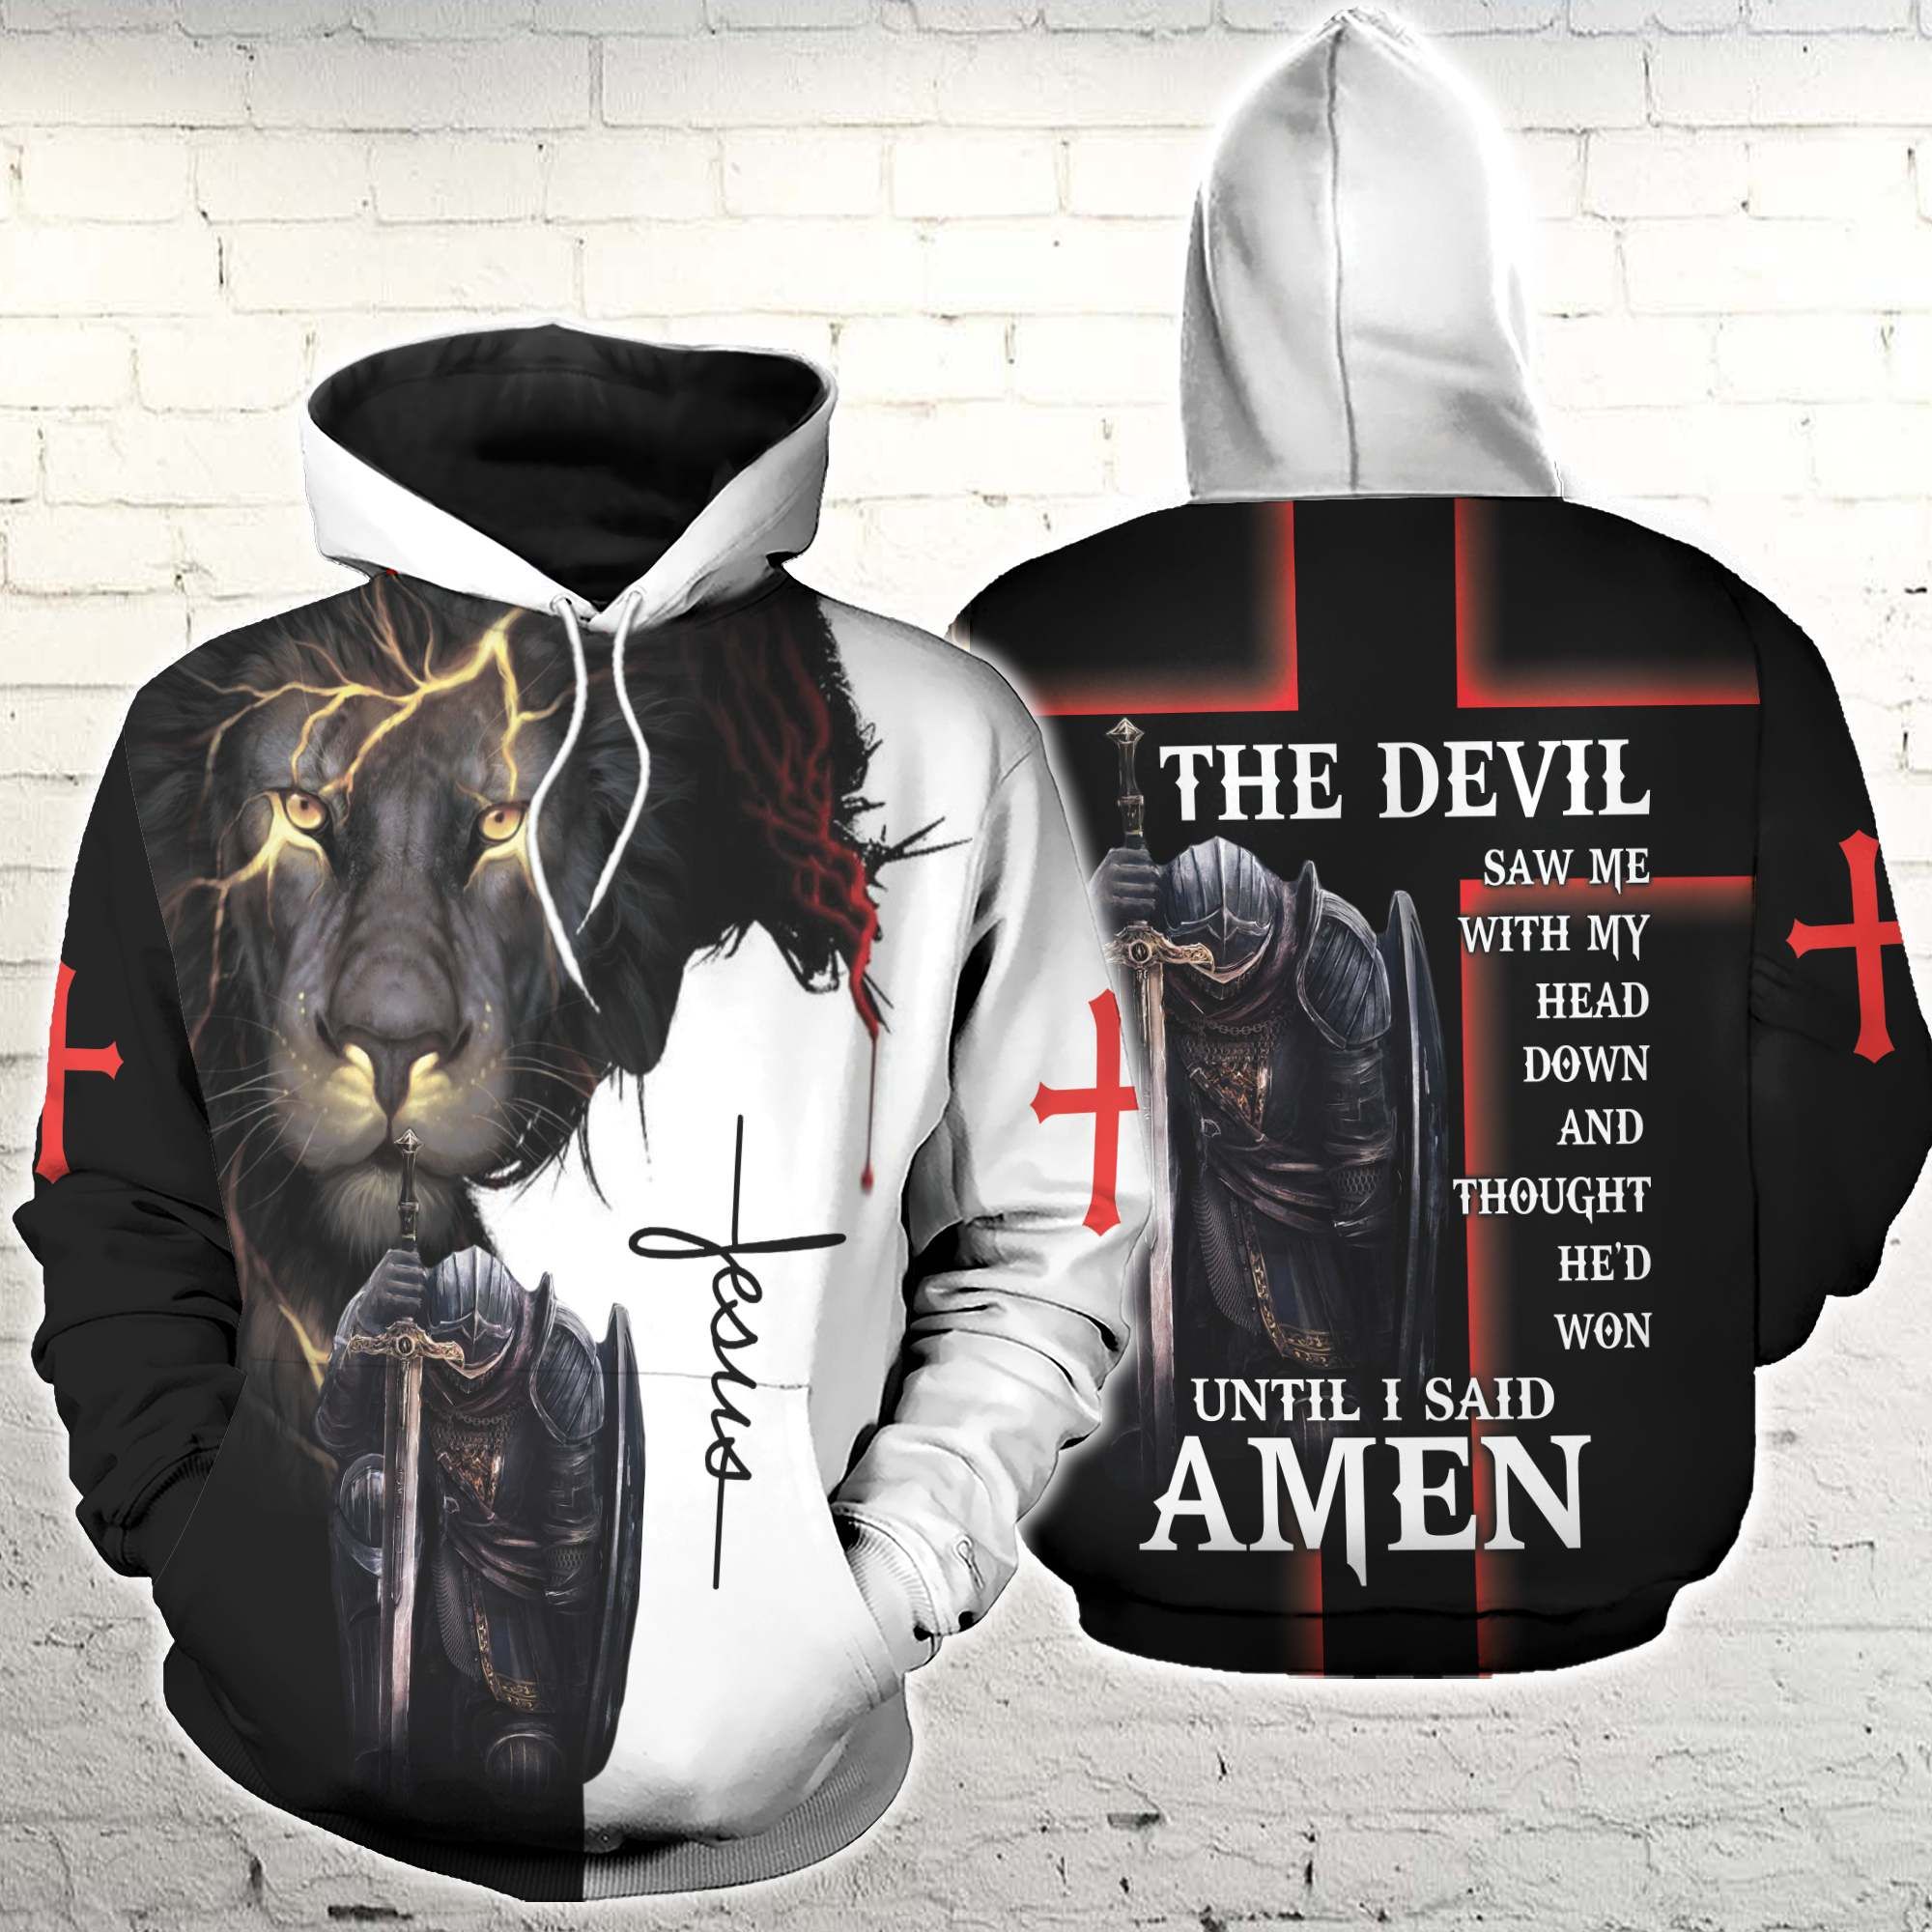 The Devil Saw Me With My Head Down 3D All Over Printed Shirts For Men and Women PAN